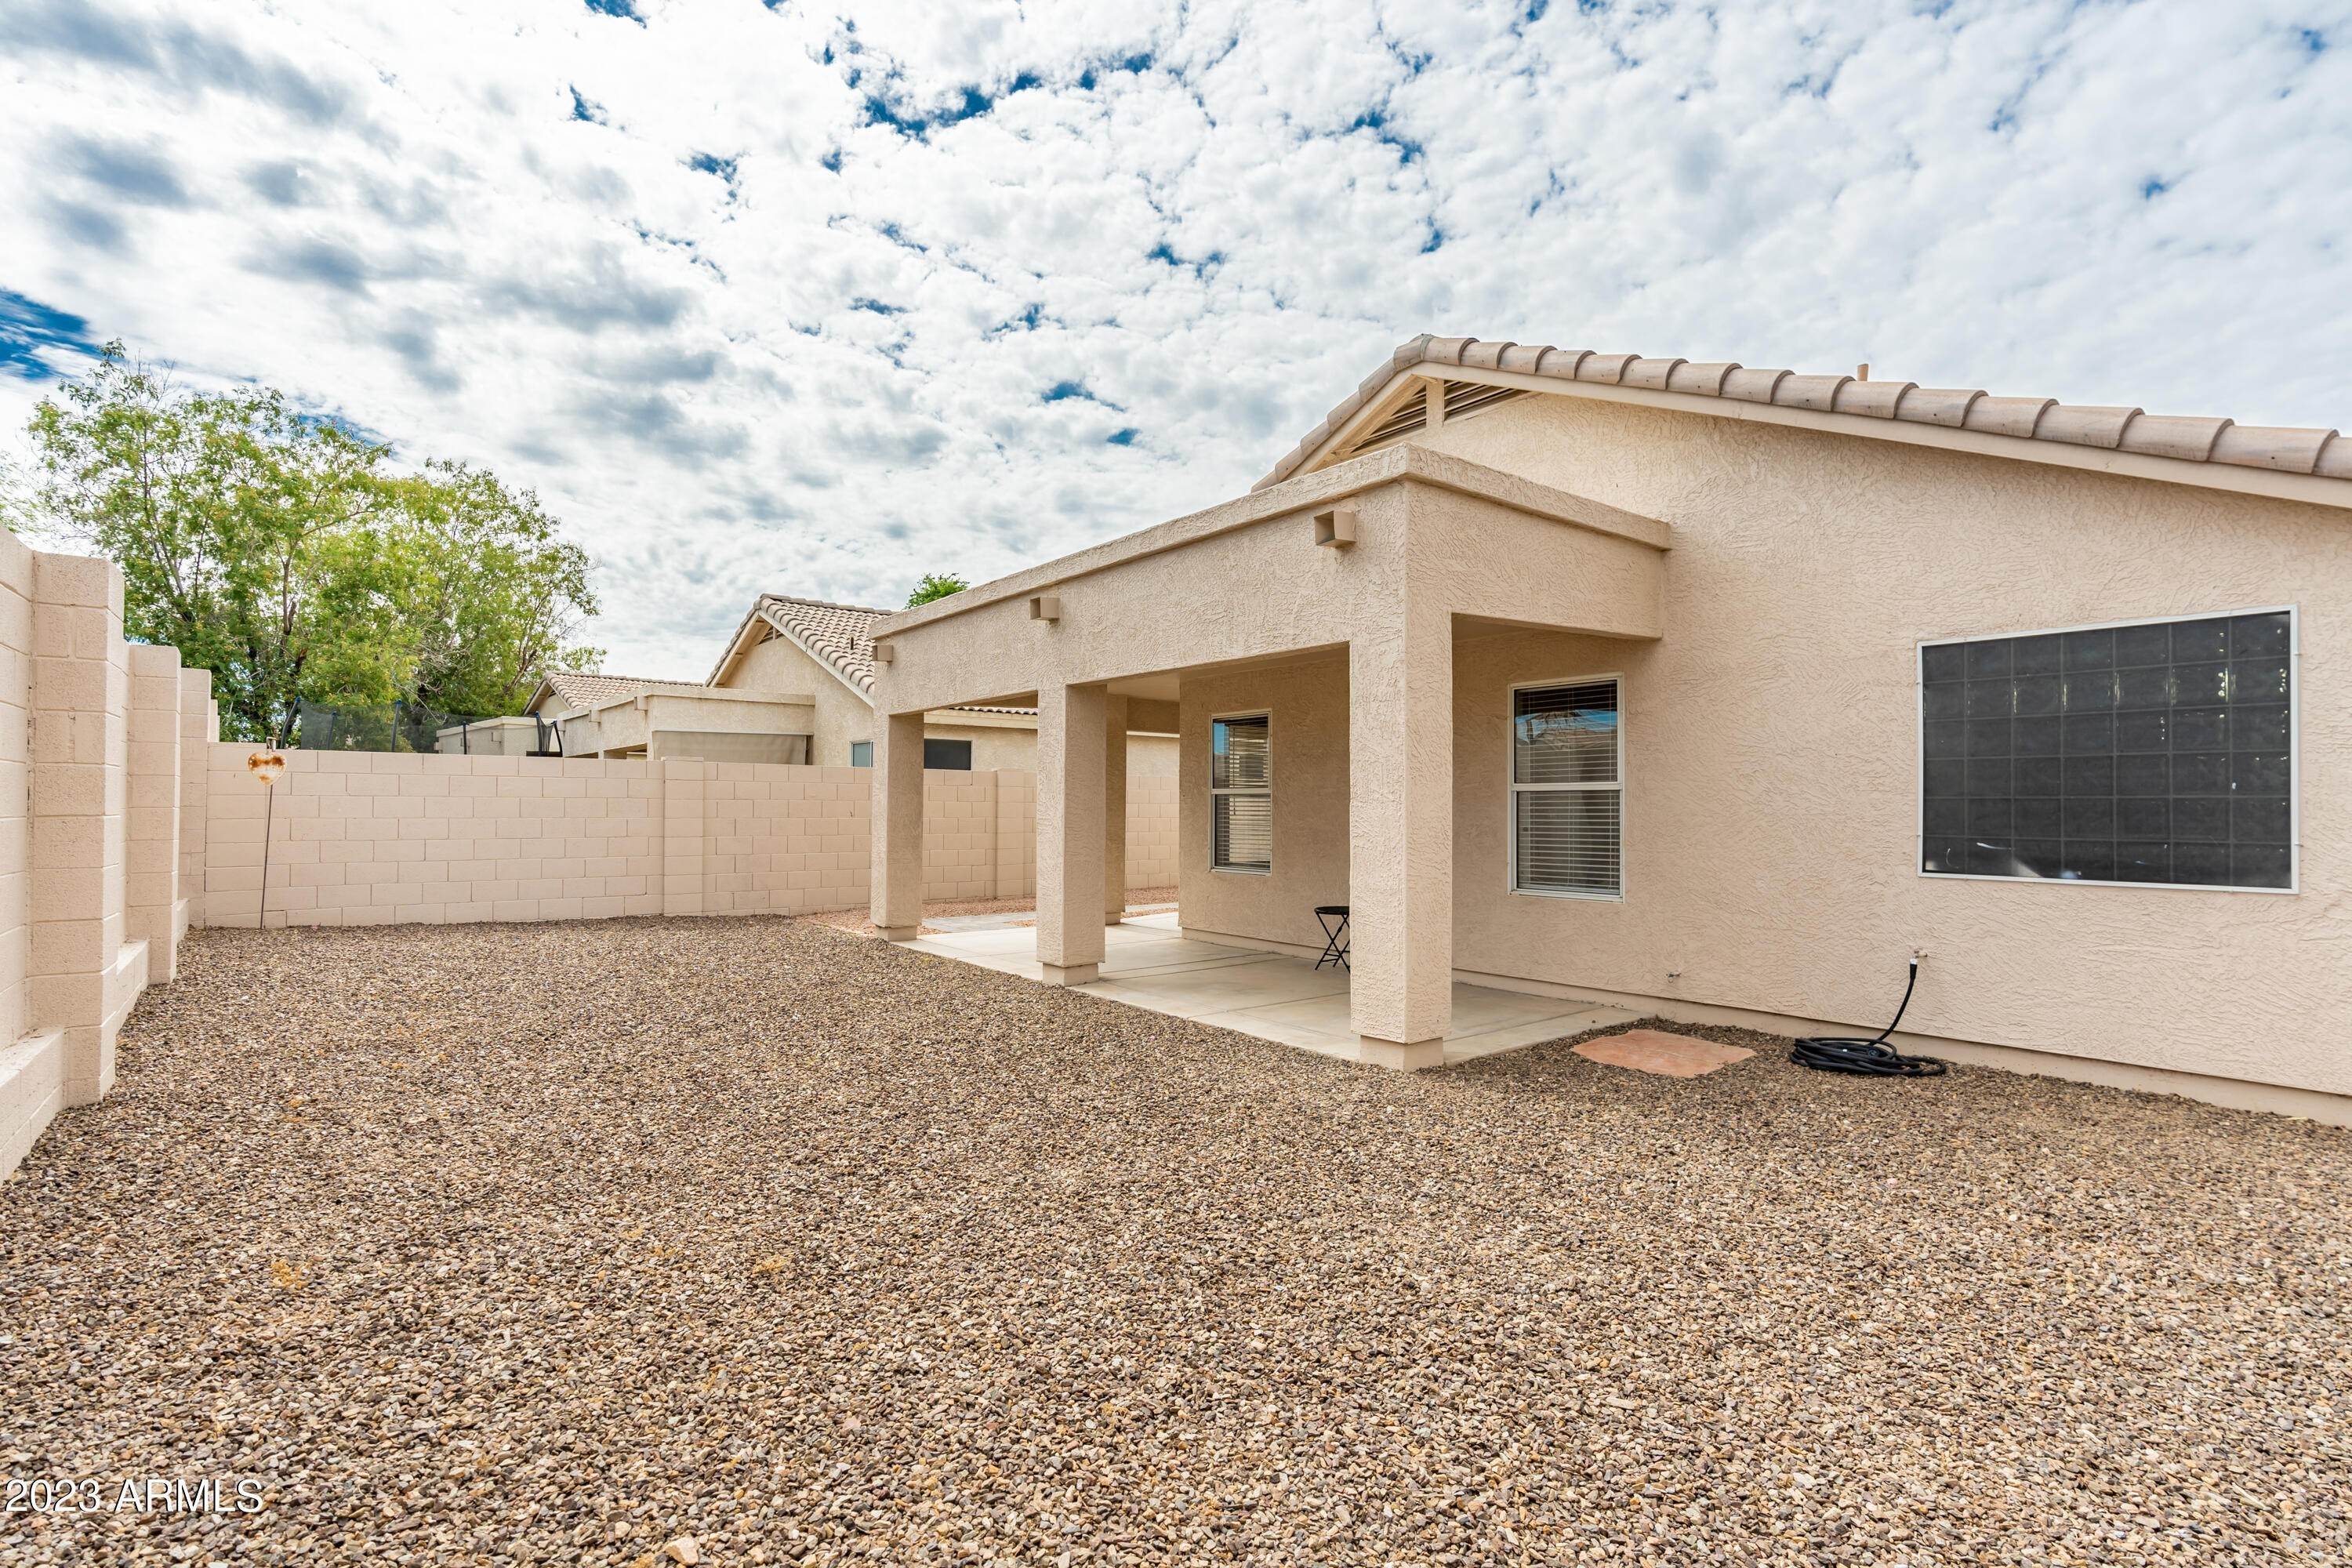 28. Single Family for Sale at Goodyear, AZ 85395